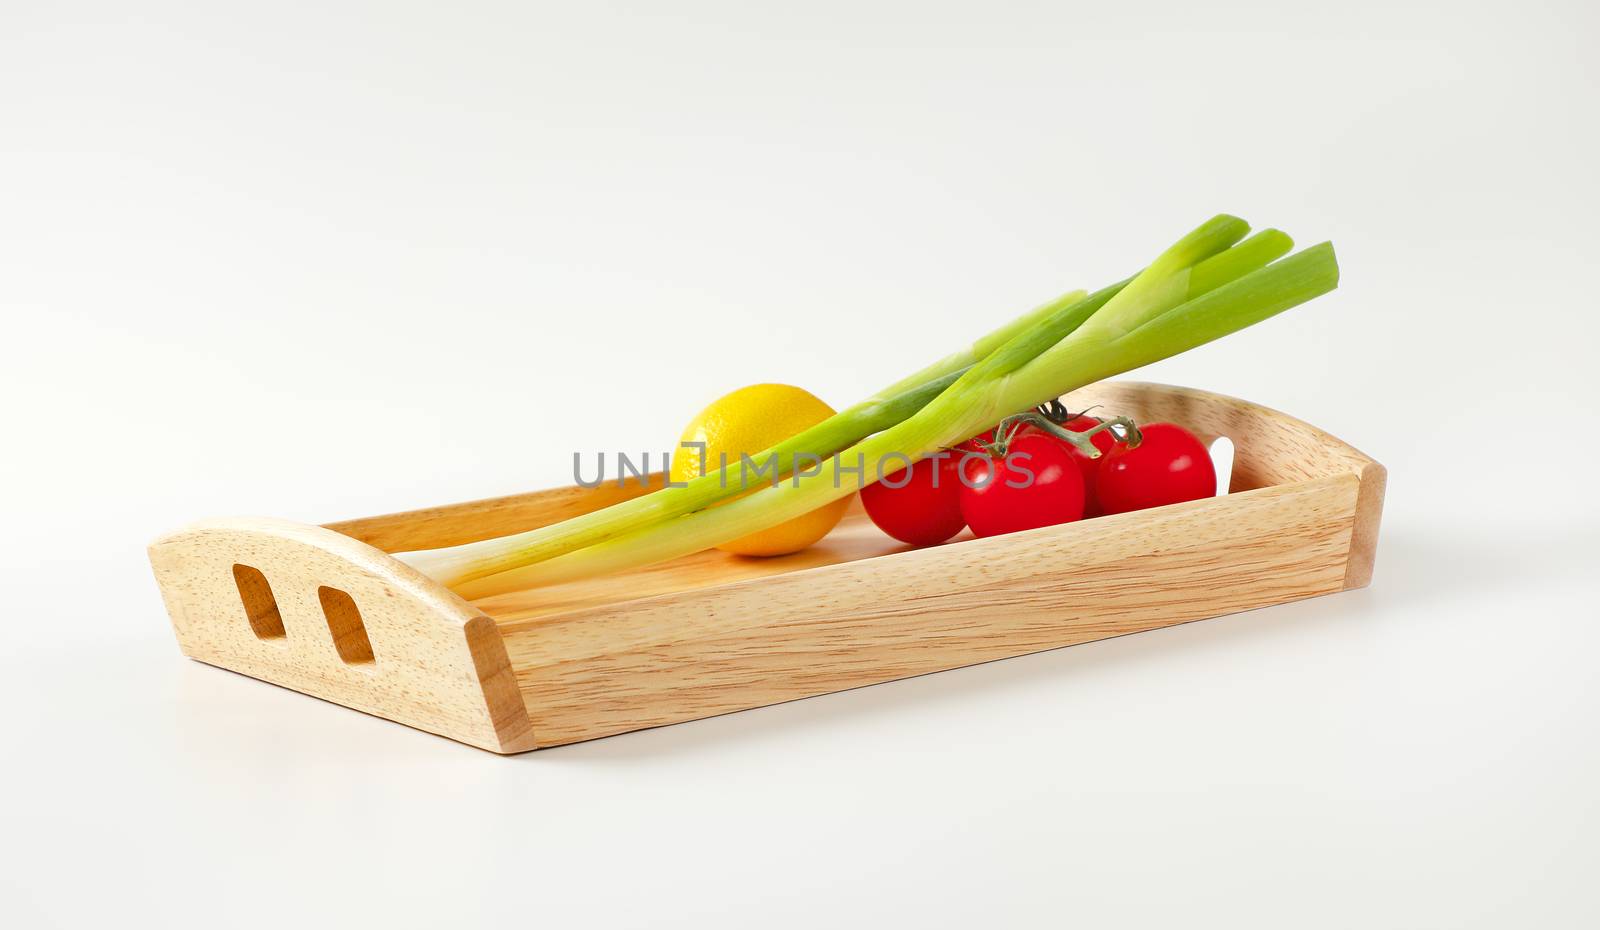 Wooden serving tray wit fresh vegetables and fruit by Digifoodstock